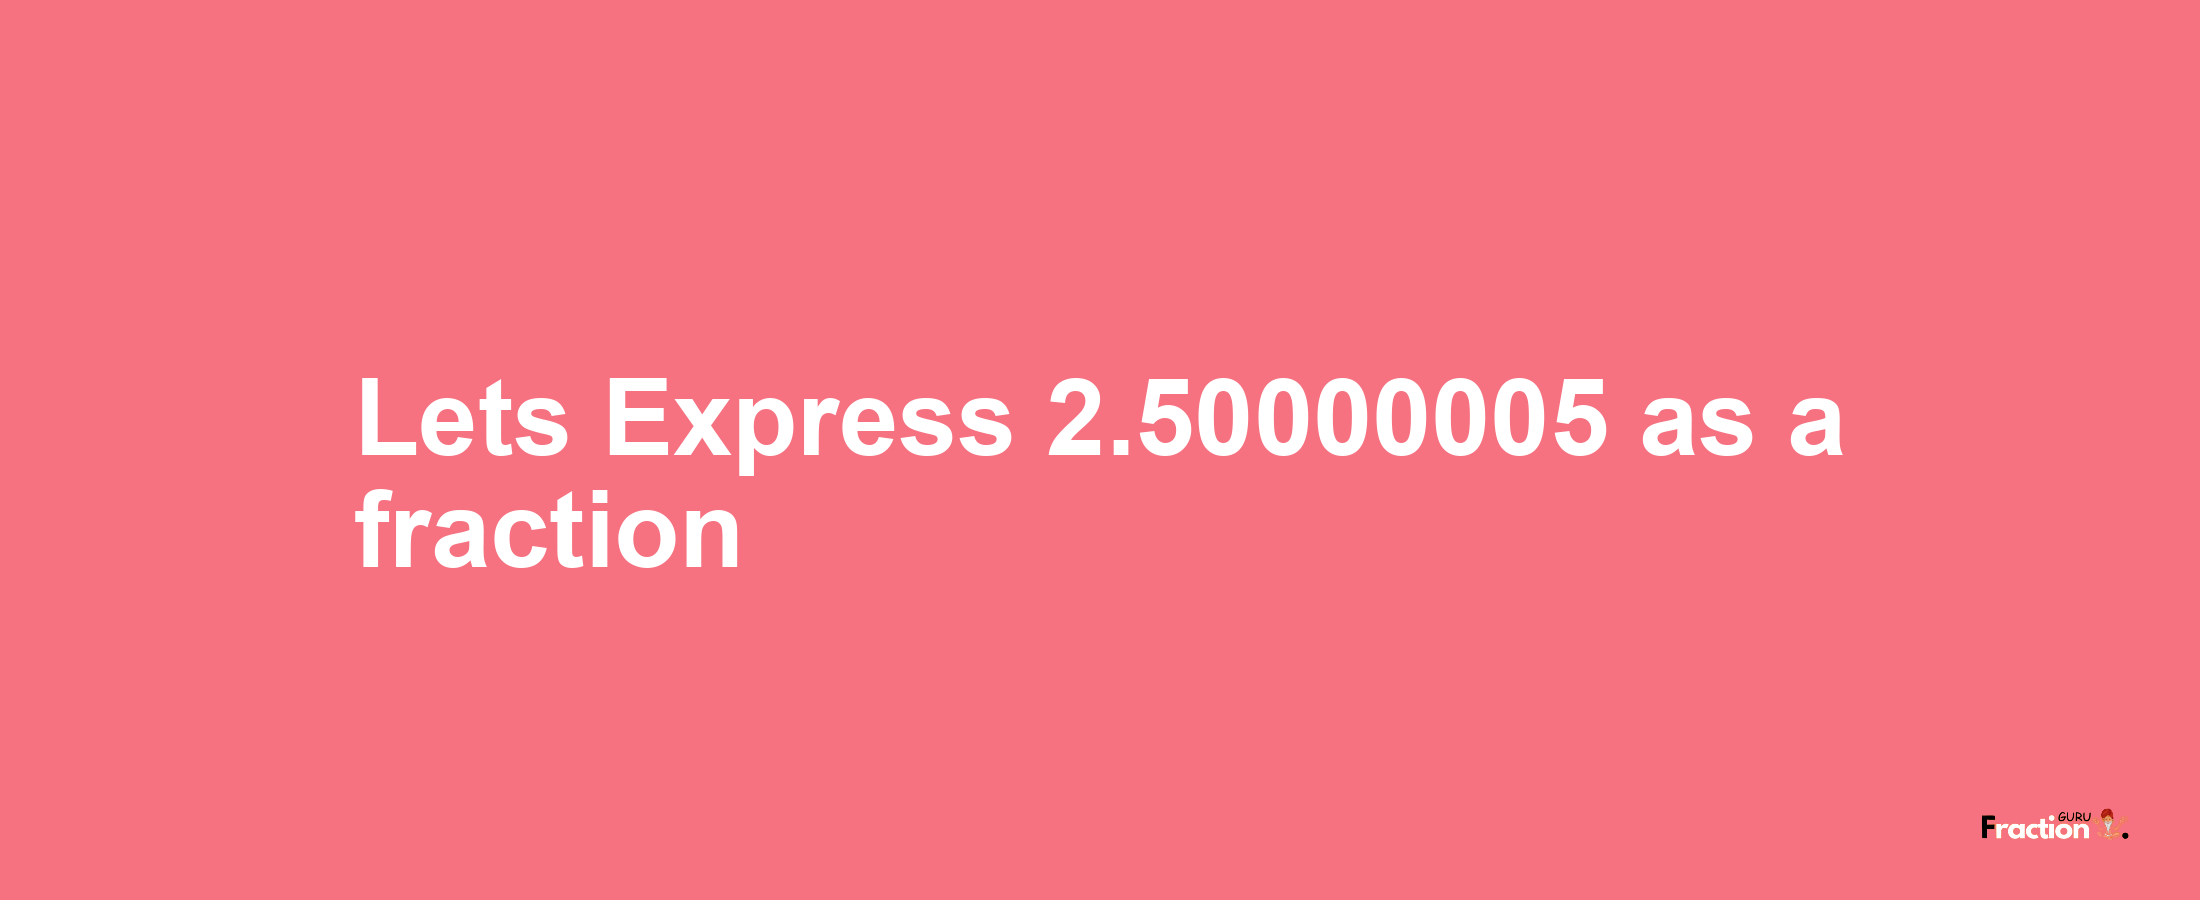 Lets Express 2.50000005 as afraction